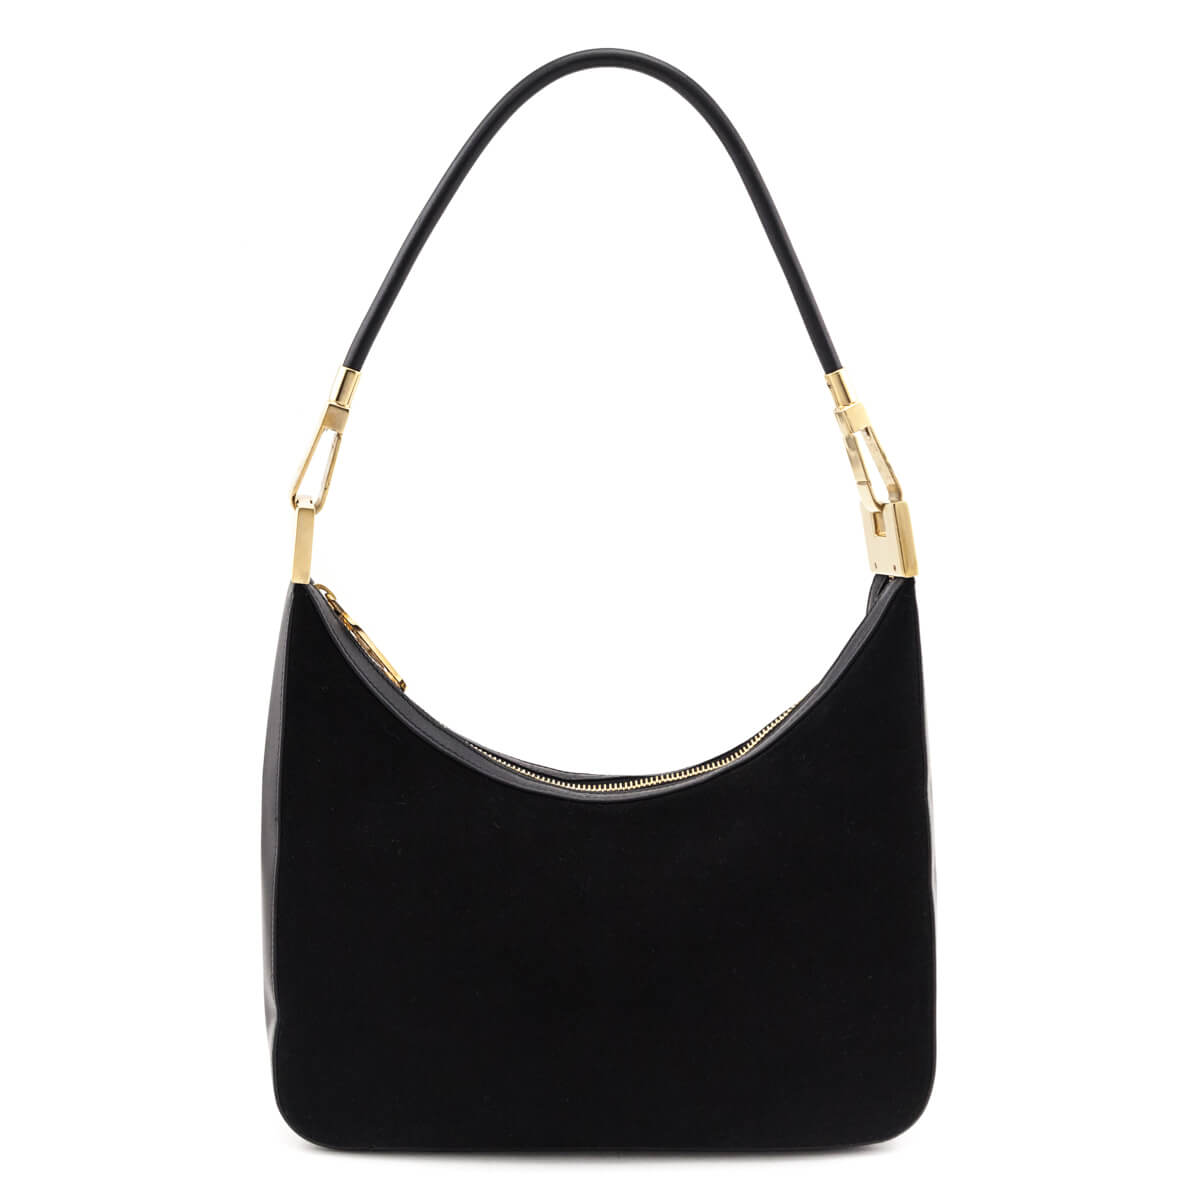 Gucci Black Suede & Leather Small Hobo - Love that Bag etc - Preowned Authentic Designer Handbags & Preloved Fashions